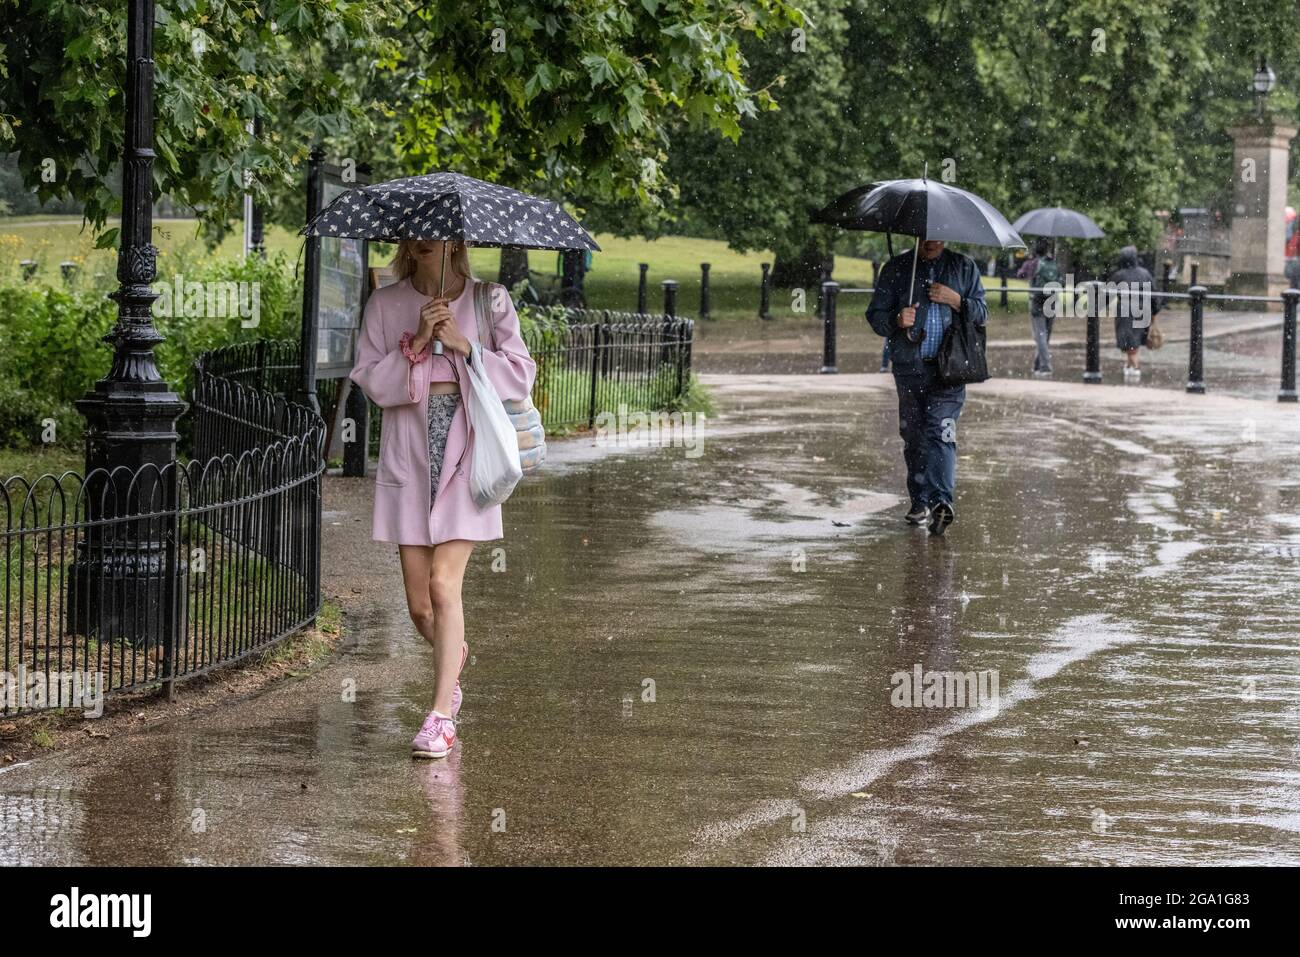 London, UK. July 28 2021: Heavy Rain Showers hit Knightsbridge, Central London, England, UK Picture shows touristswalking through Hyde Park Corner in the rain as heavy rain showers sweep across Central London and southern parts of England. Credit: Clickpics/Alamy Live News Stock Photo